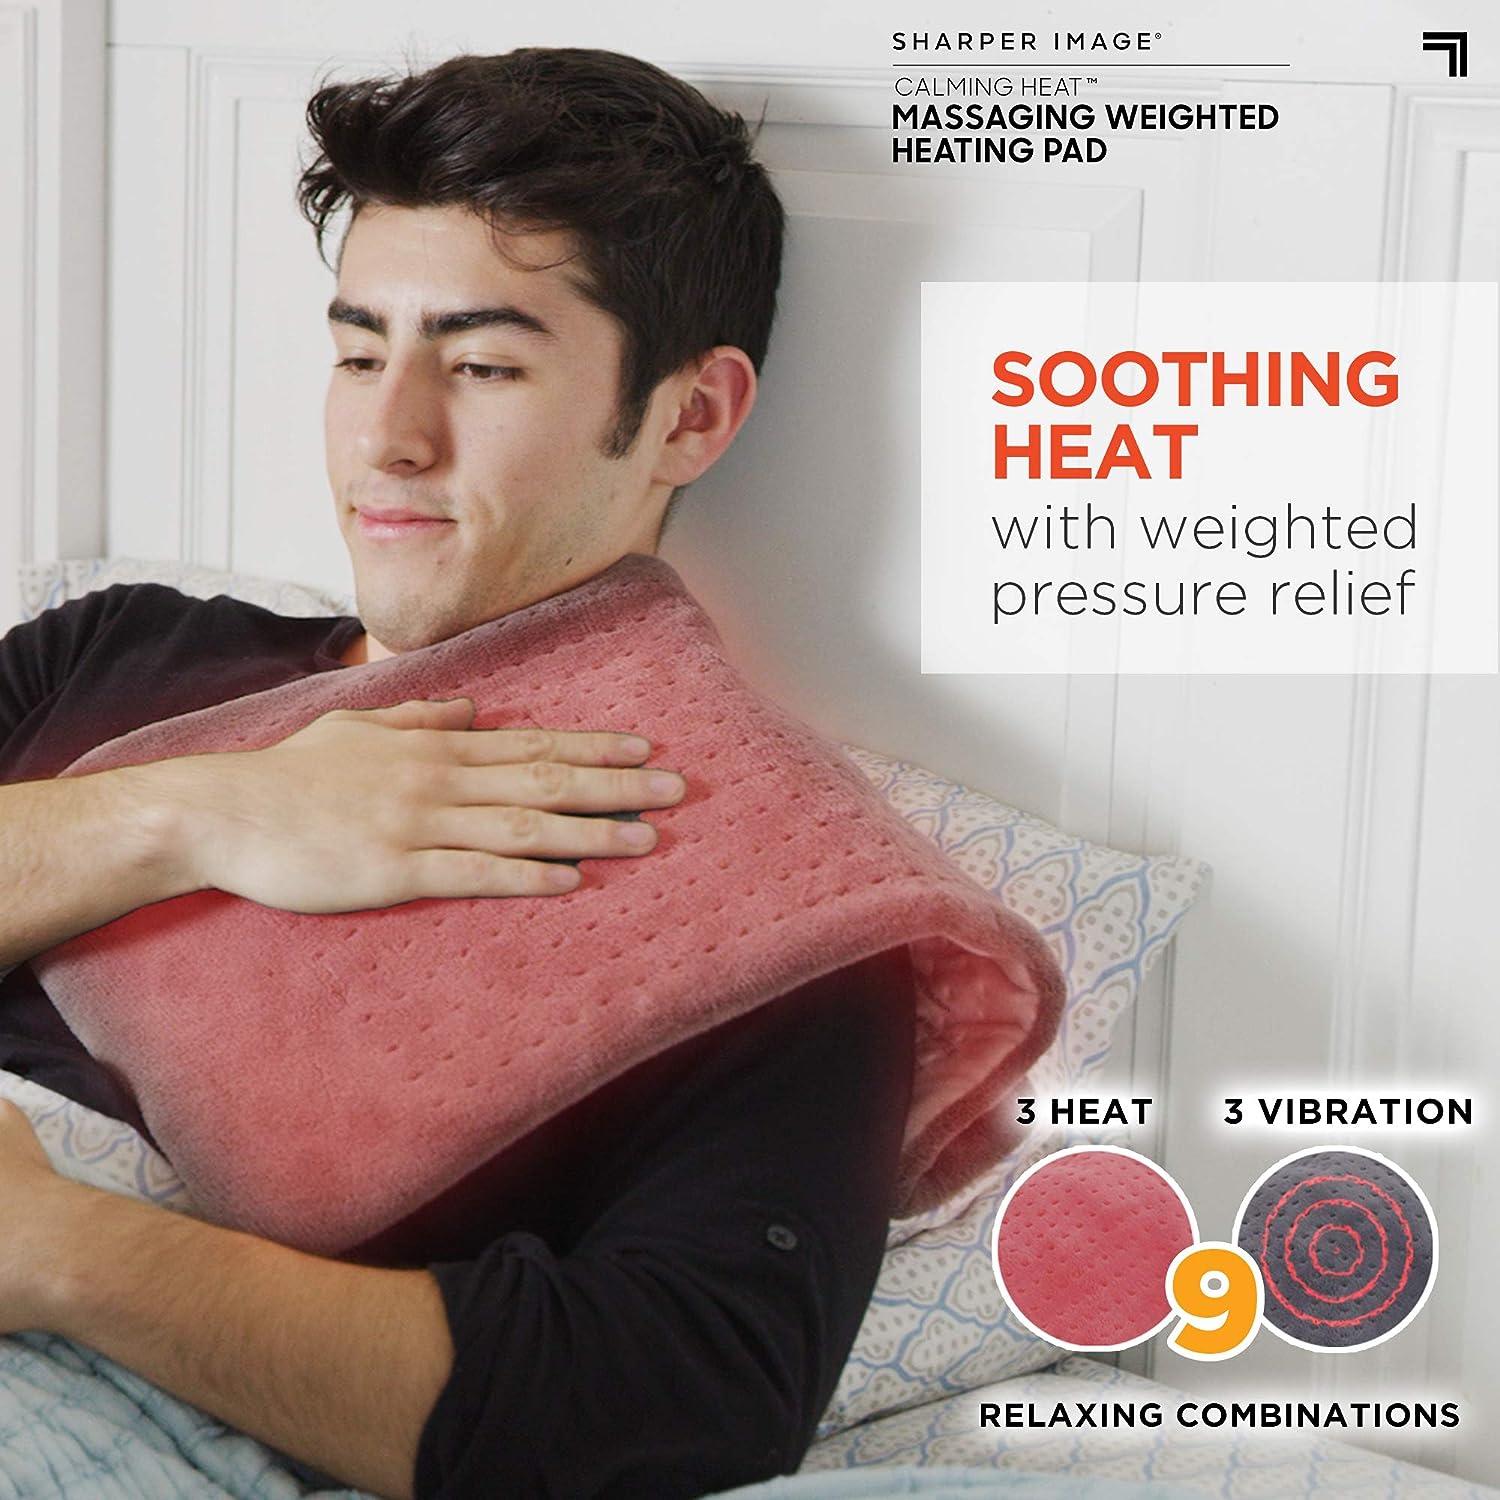 A person getting massage for his shoulder with the help of Massaging Weighted Heating Pad